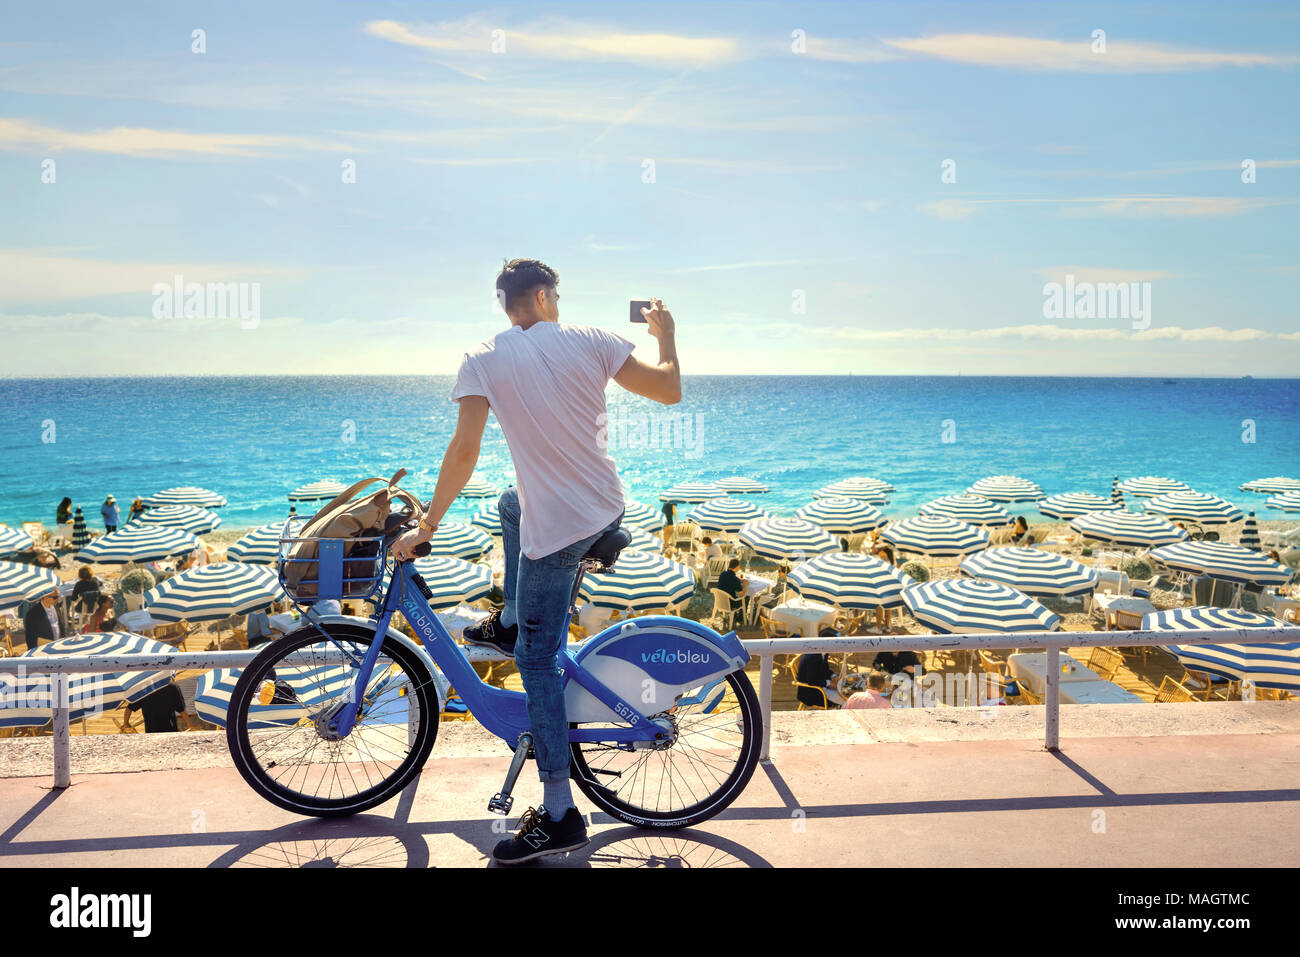 Street scene with bicycler and sunshades on luxury beach. Nice, France, Cote d'Azur Stock Photo